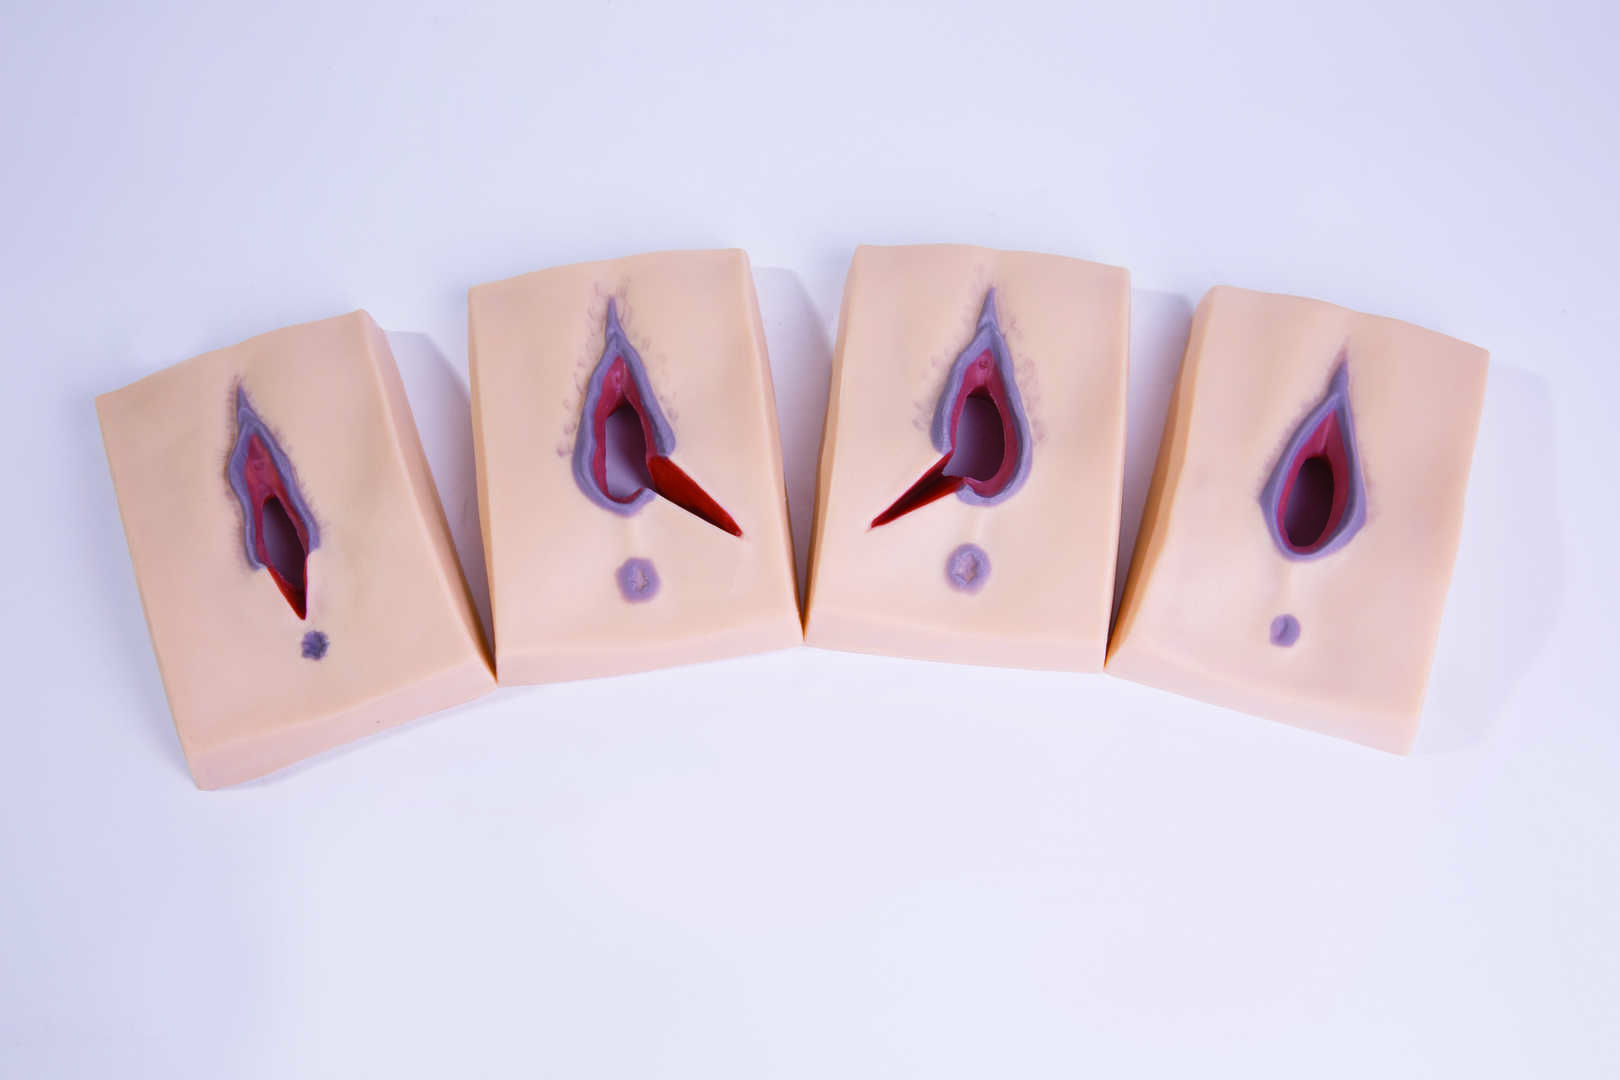 Episiotomy Suturing Trainers